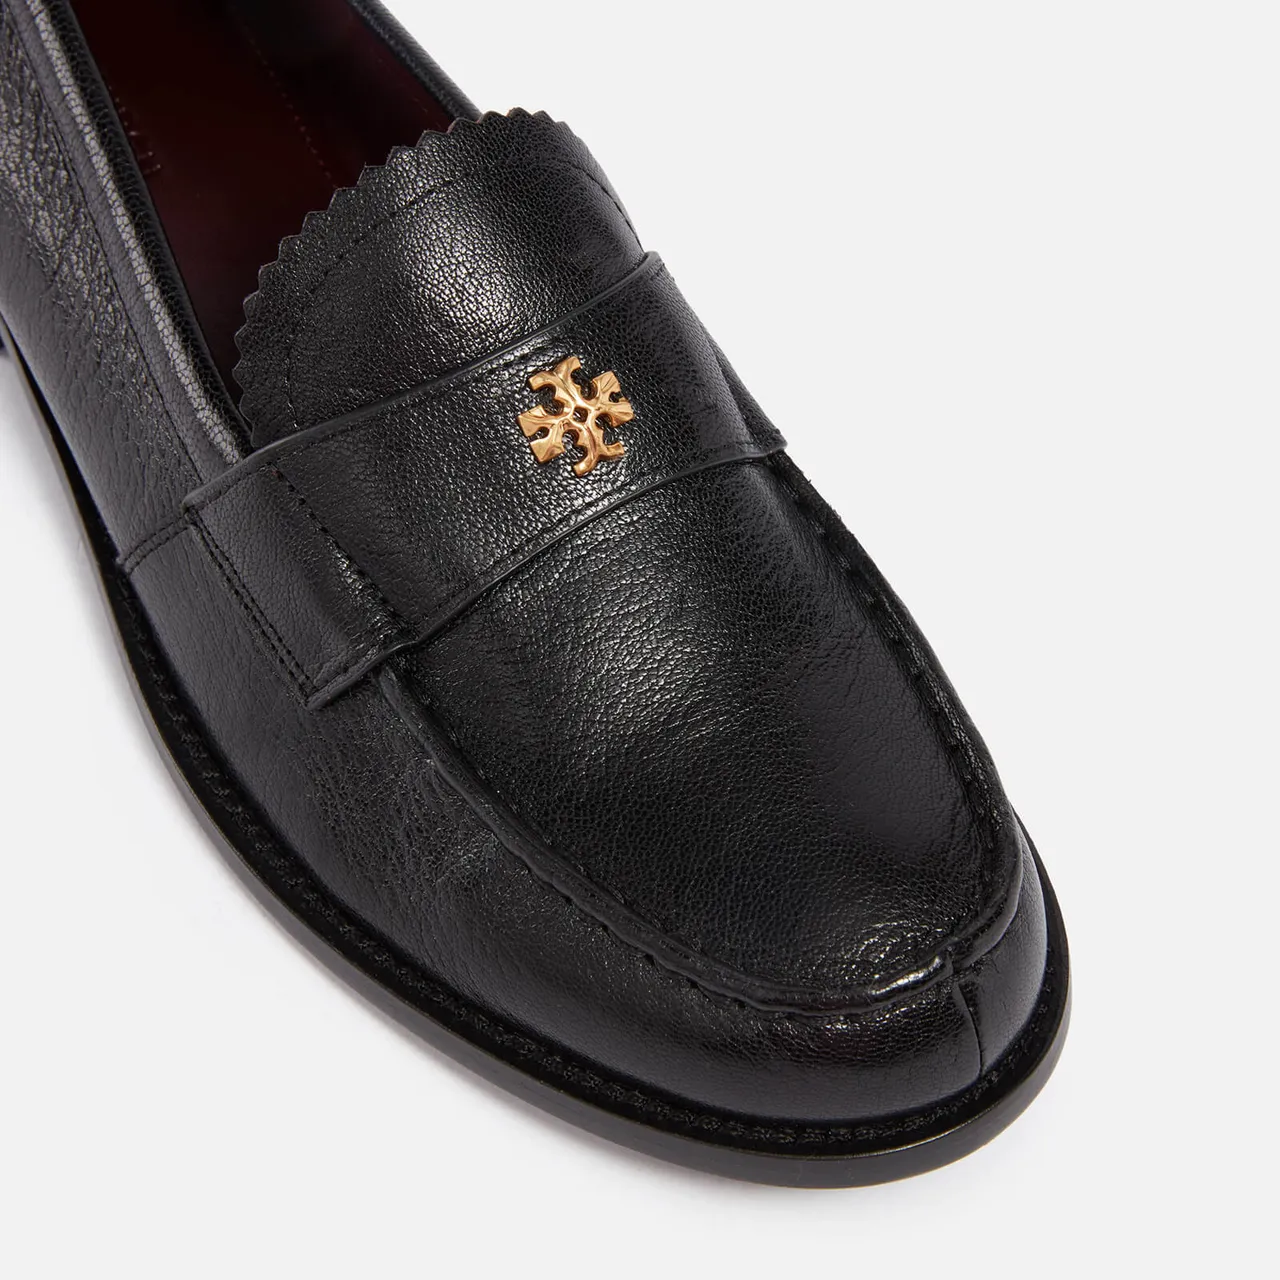 Tory Burch Women's Perry Leather Loafers - UK